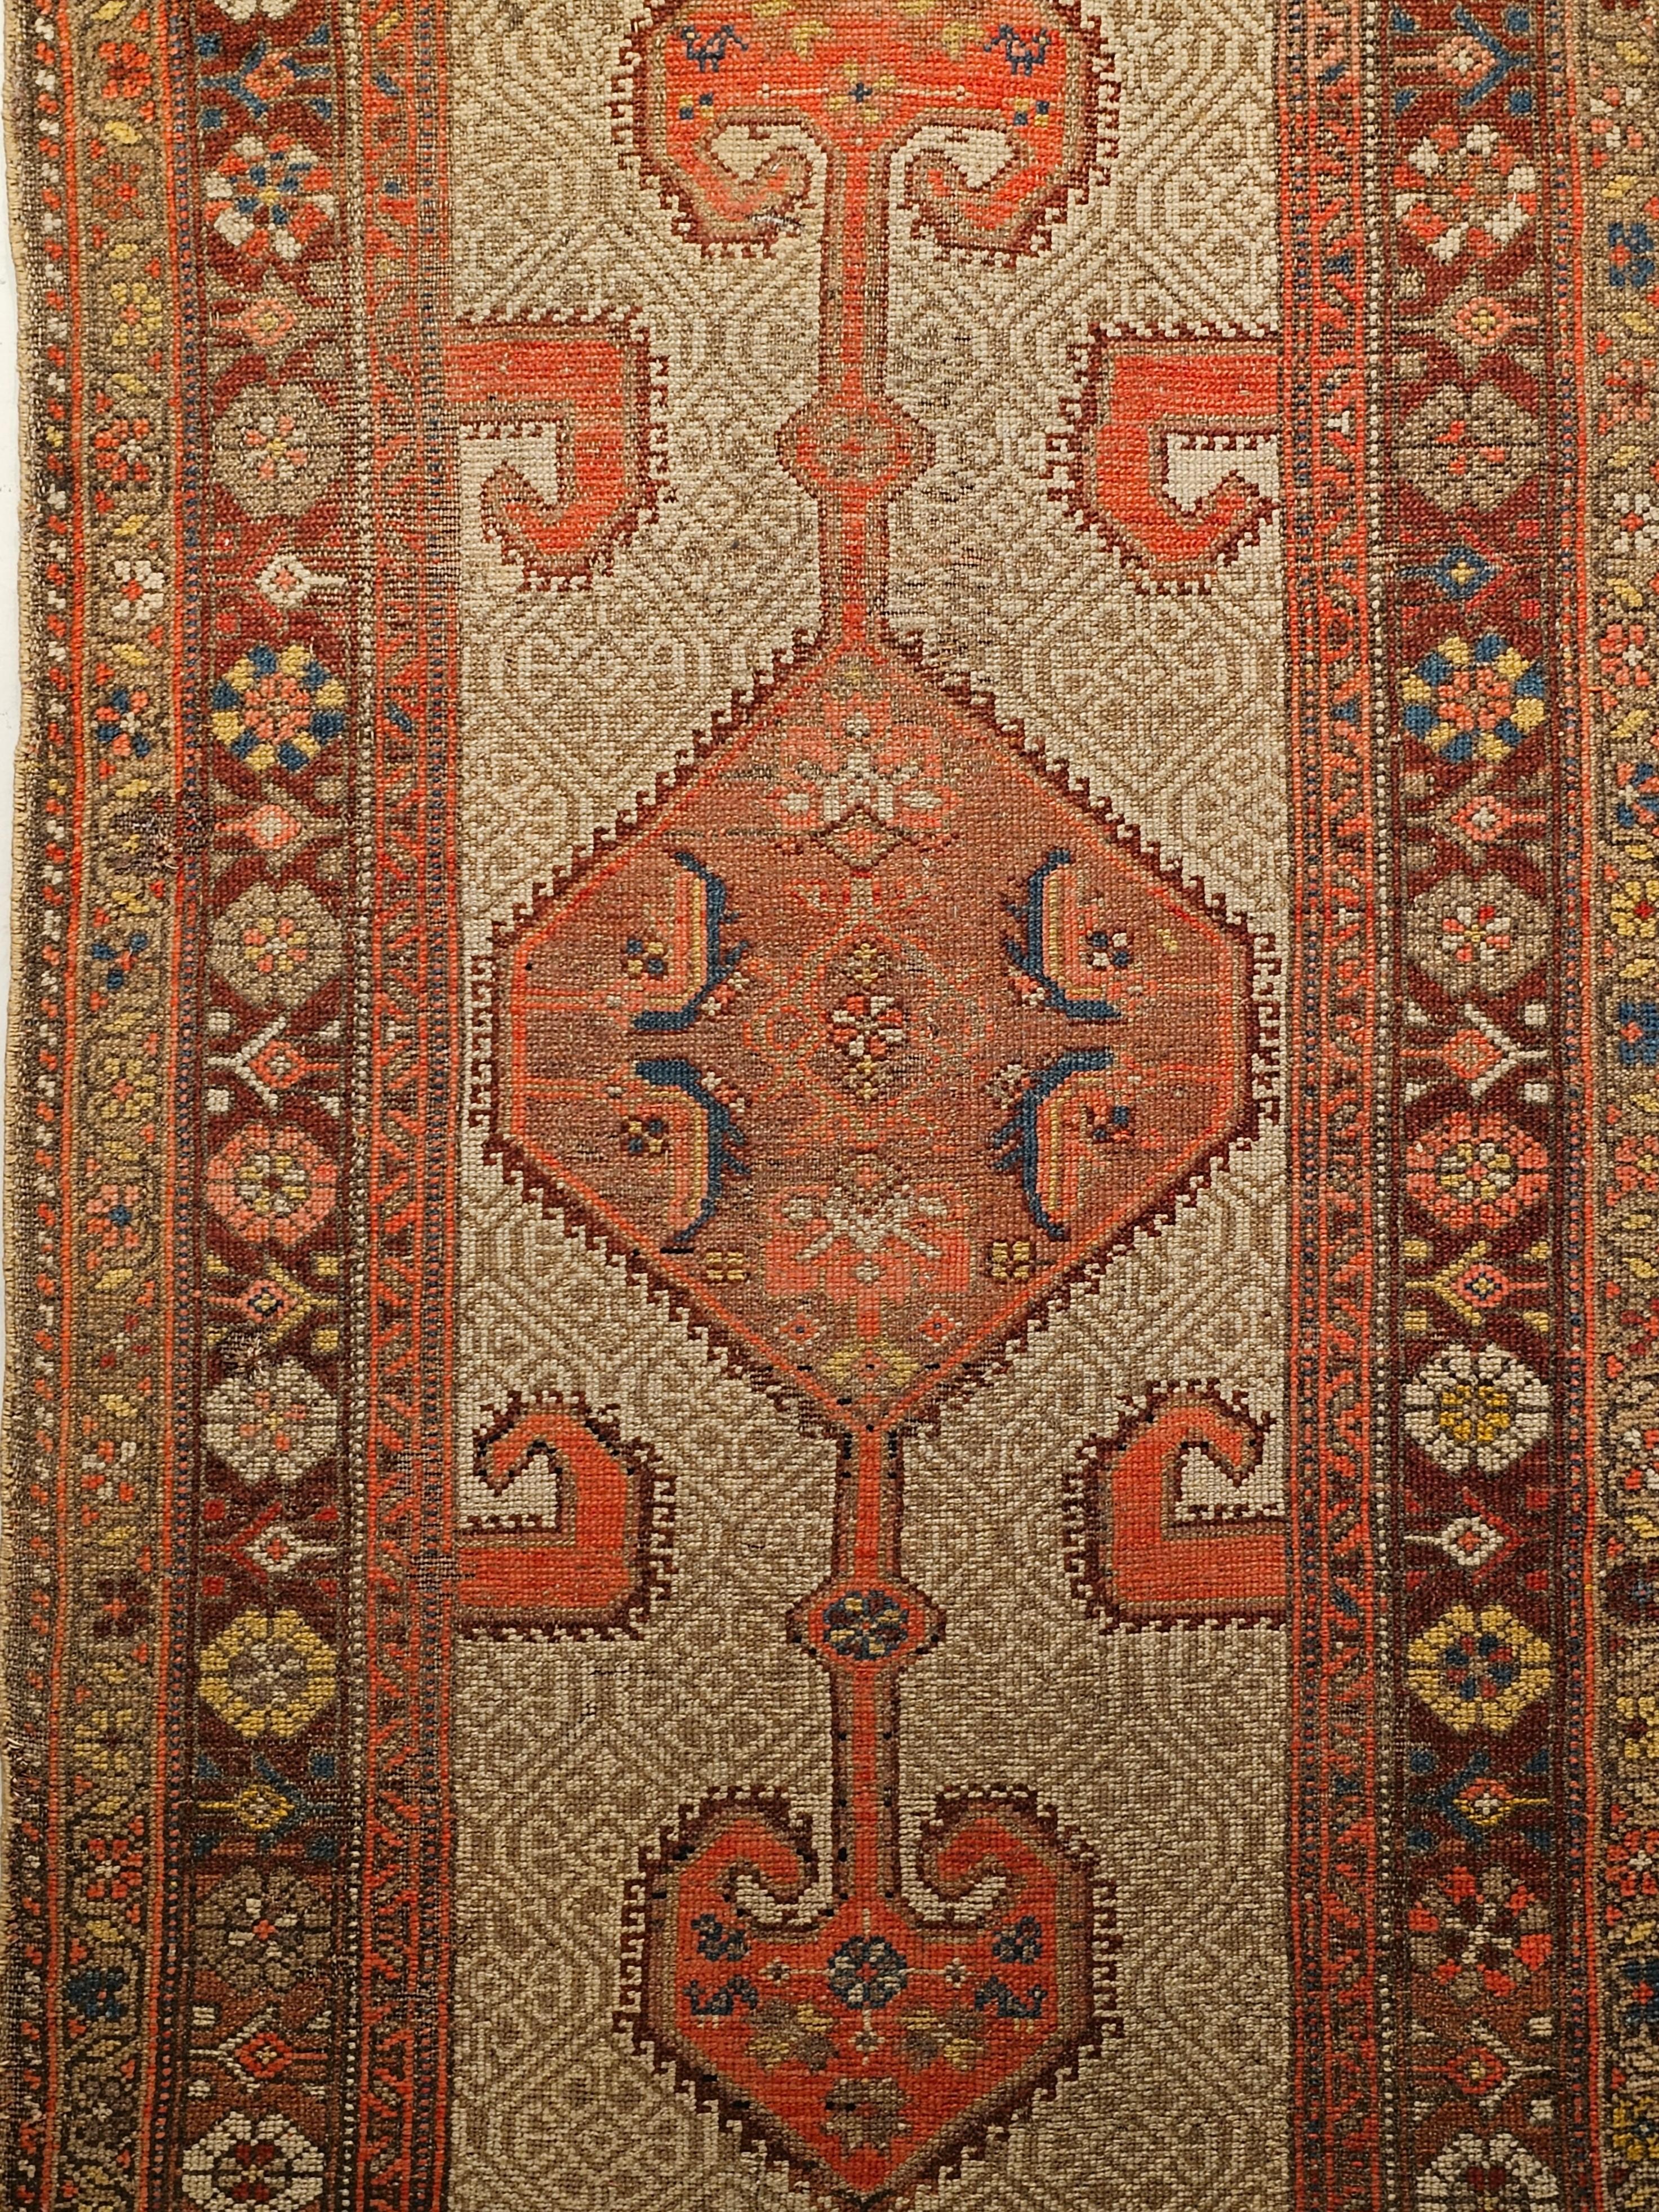 A vintage Persian Malayer runner in geometric pattern in camelhair, burgundy, rust red, and ivory colors.  This Persian Camelhair Malayer hand knotted rug is truly a masterpiece of village weaving from the late 1800s.   A large elongated hexagonal